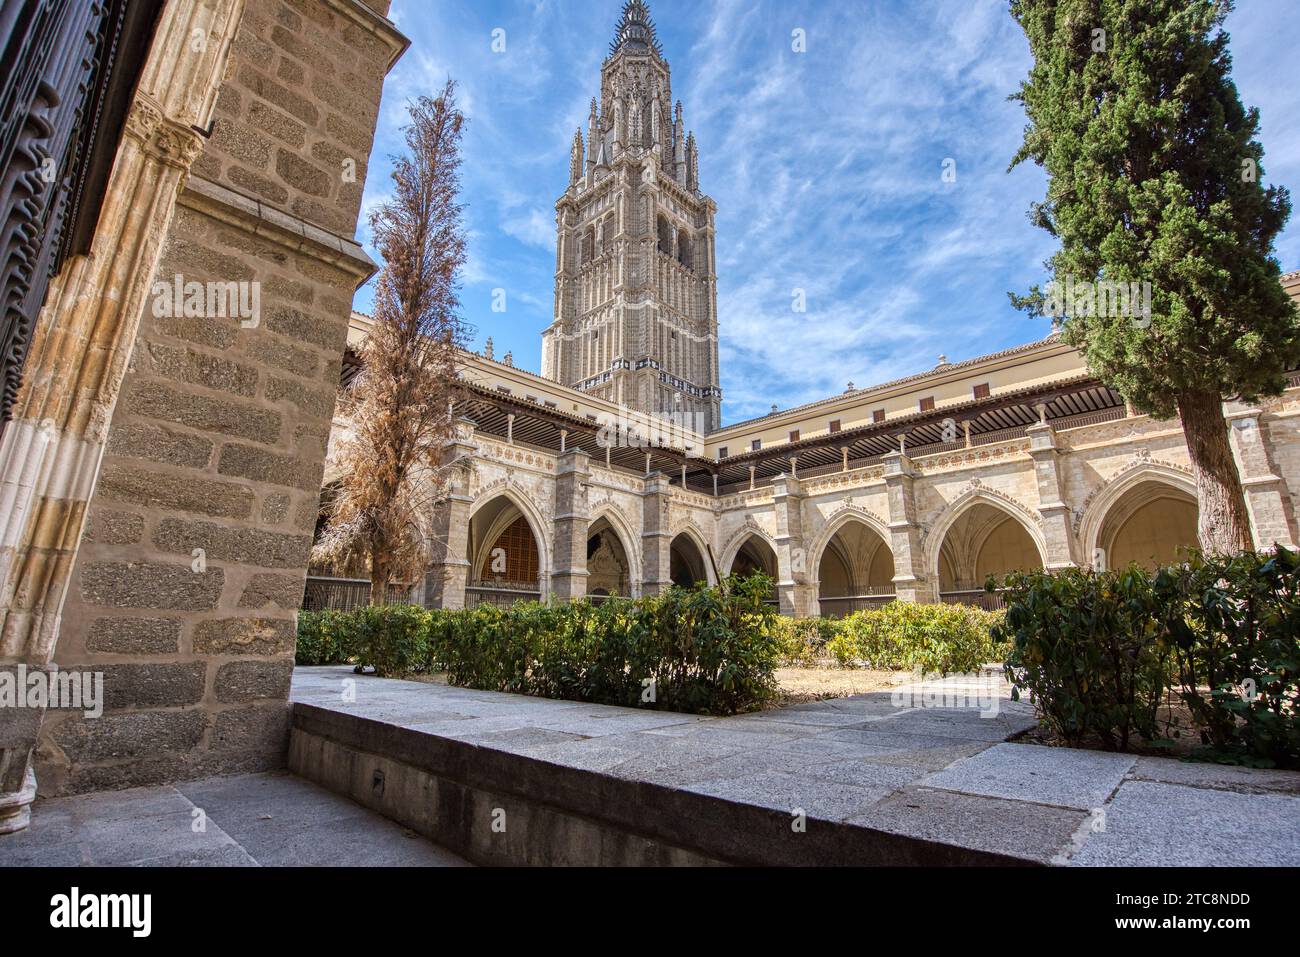 The 13th century Primatial Cathedral of Saint Mary of Toledo is a popular tourist attraction in historic Toledo, Spai Stock Photo